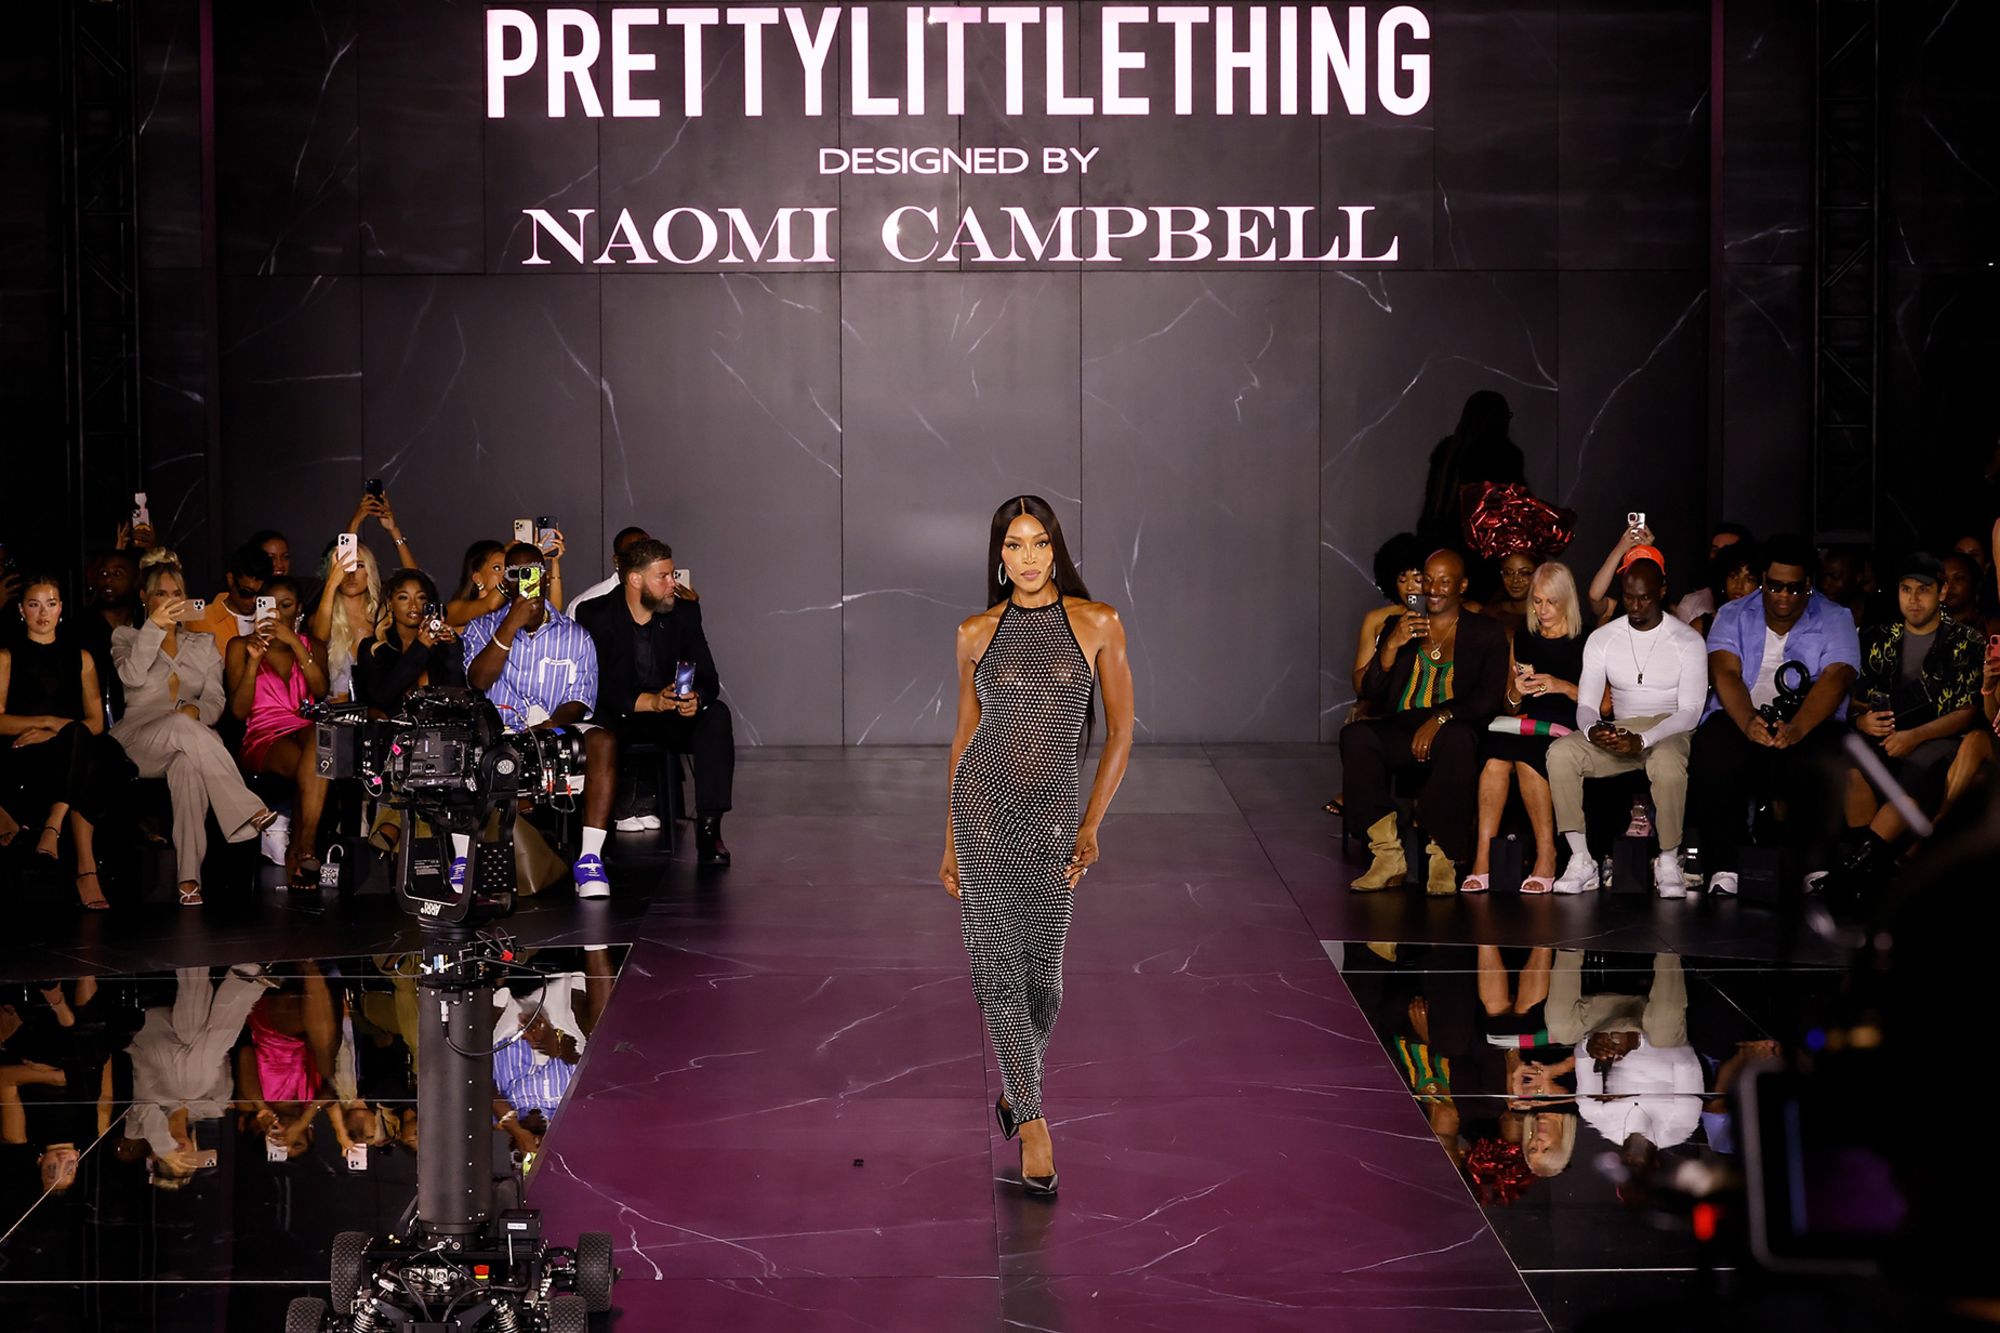 Naomi Campbell showcases fast fashion collection with PrettyLittleThing